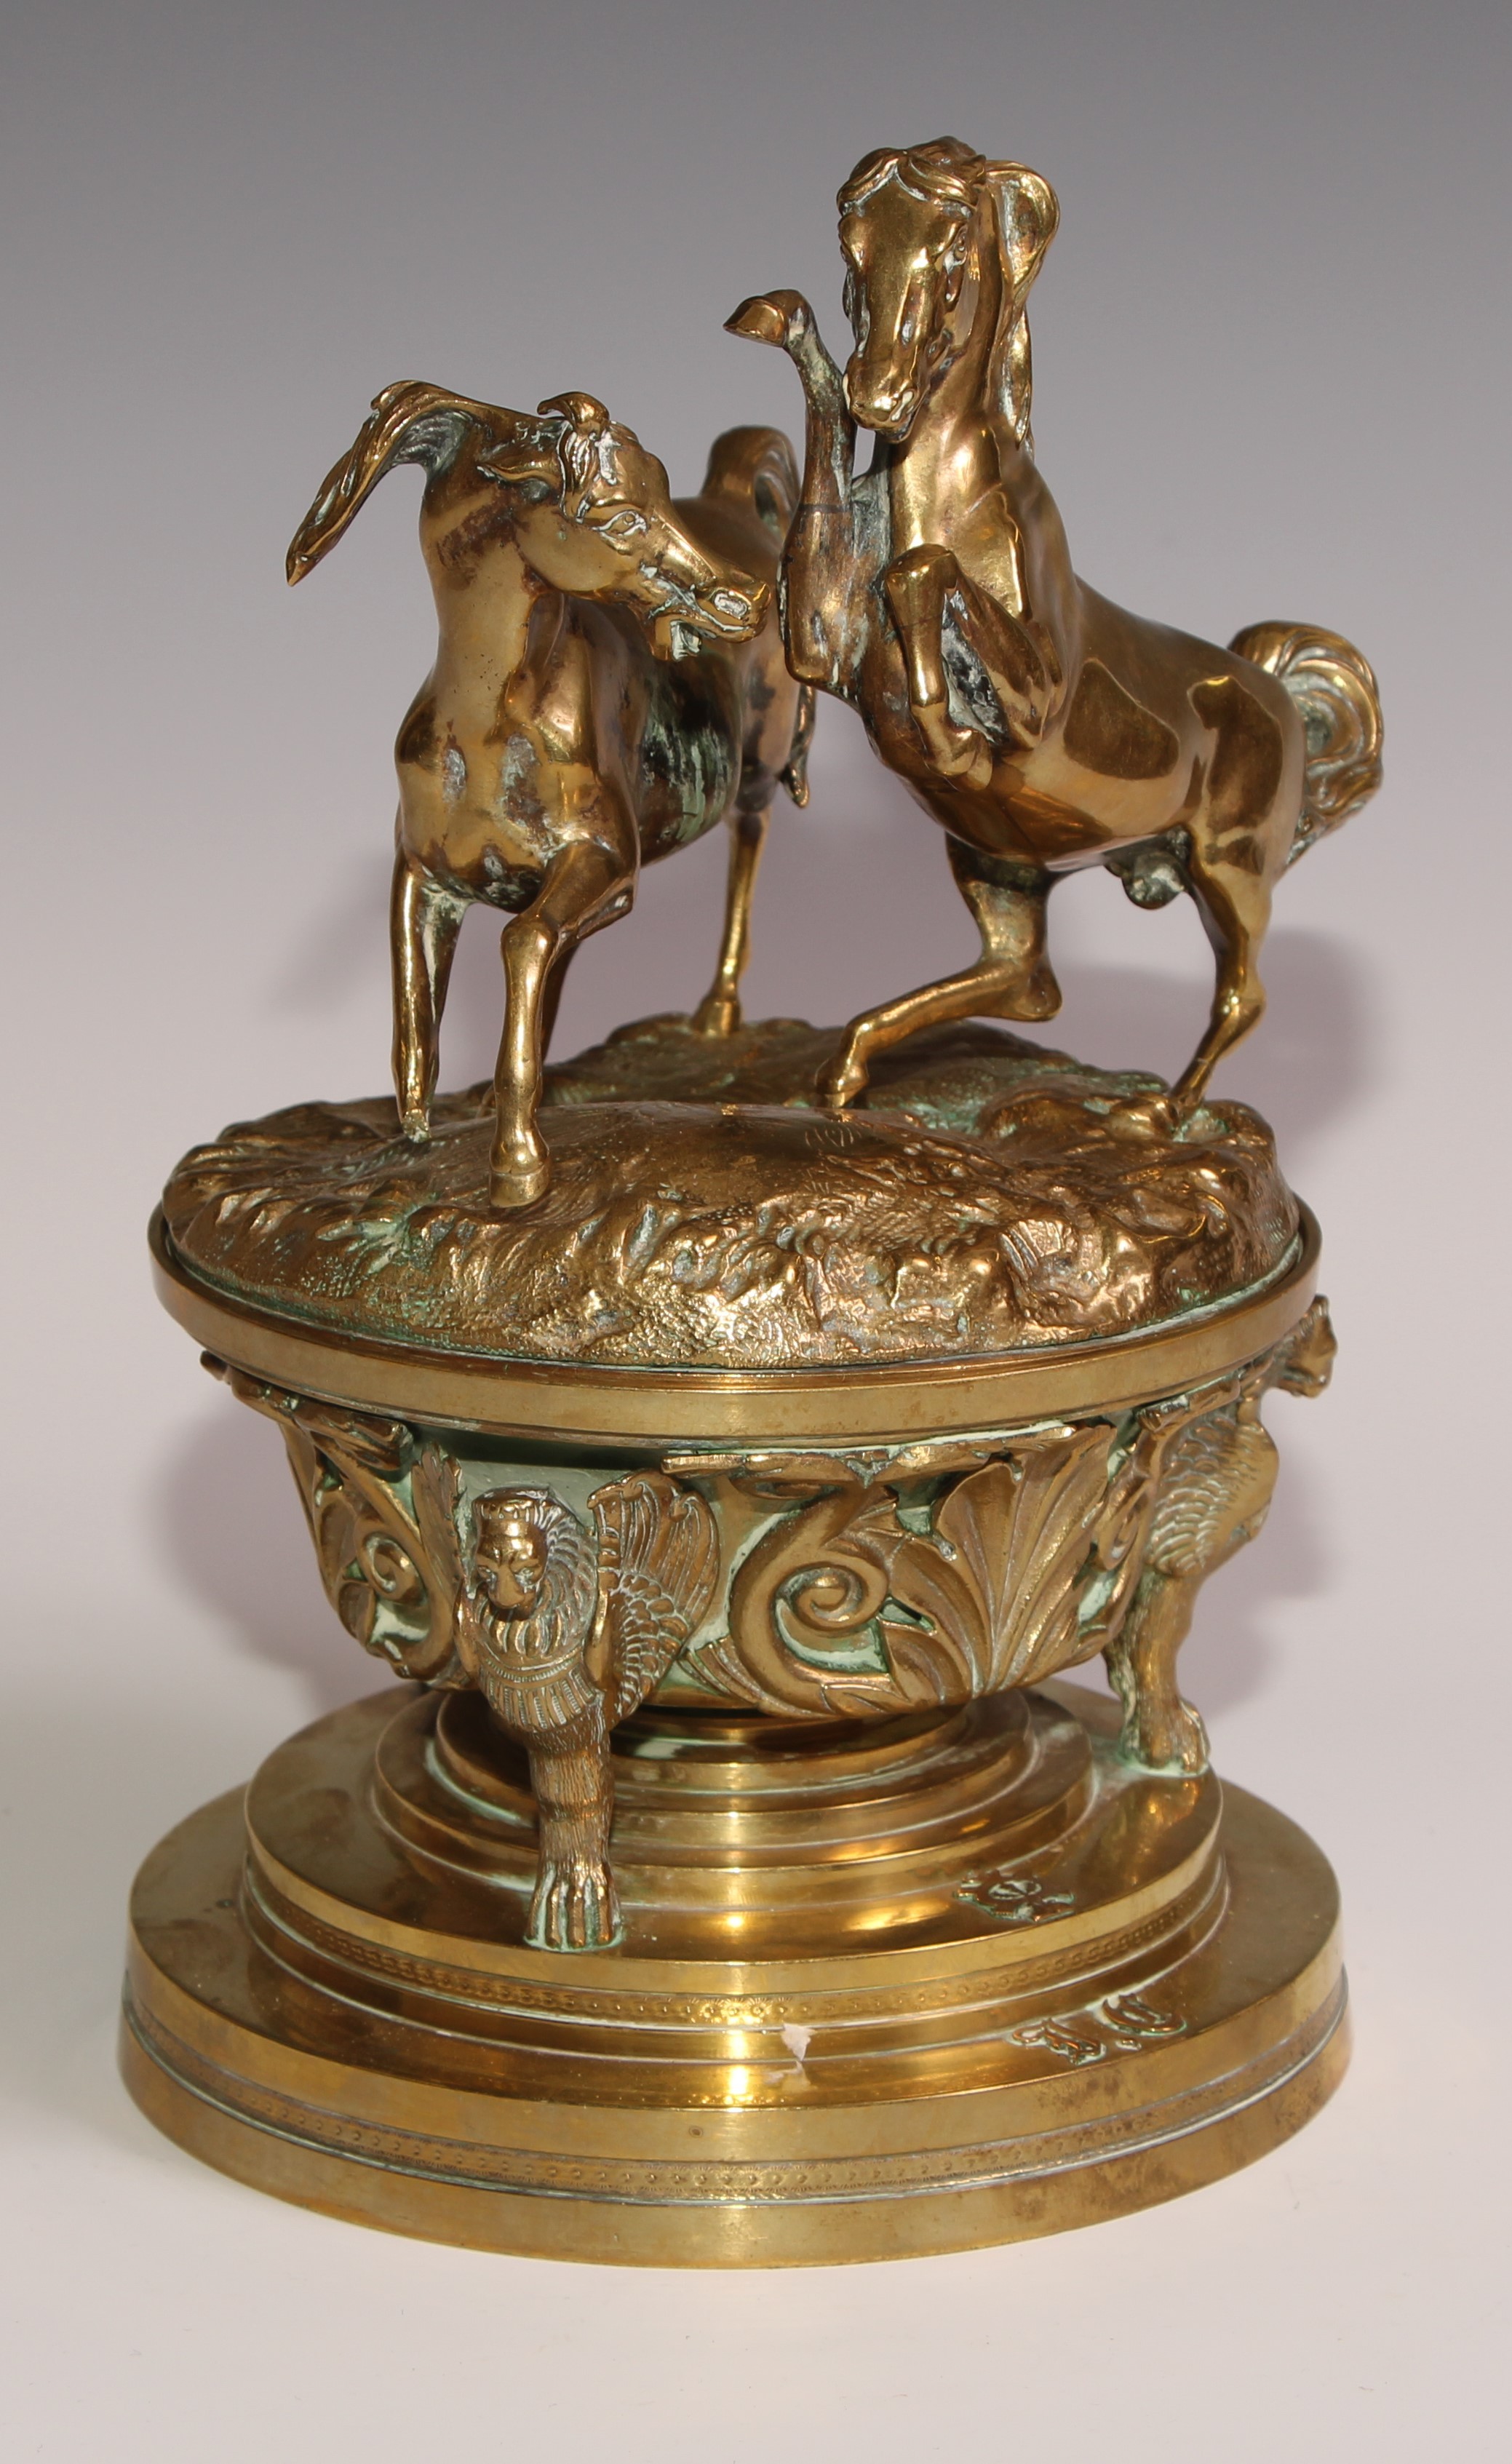 A substantial sculptural 19th century French bronze inkwell, the cover cast with a pair horses - Image 2 of 5